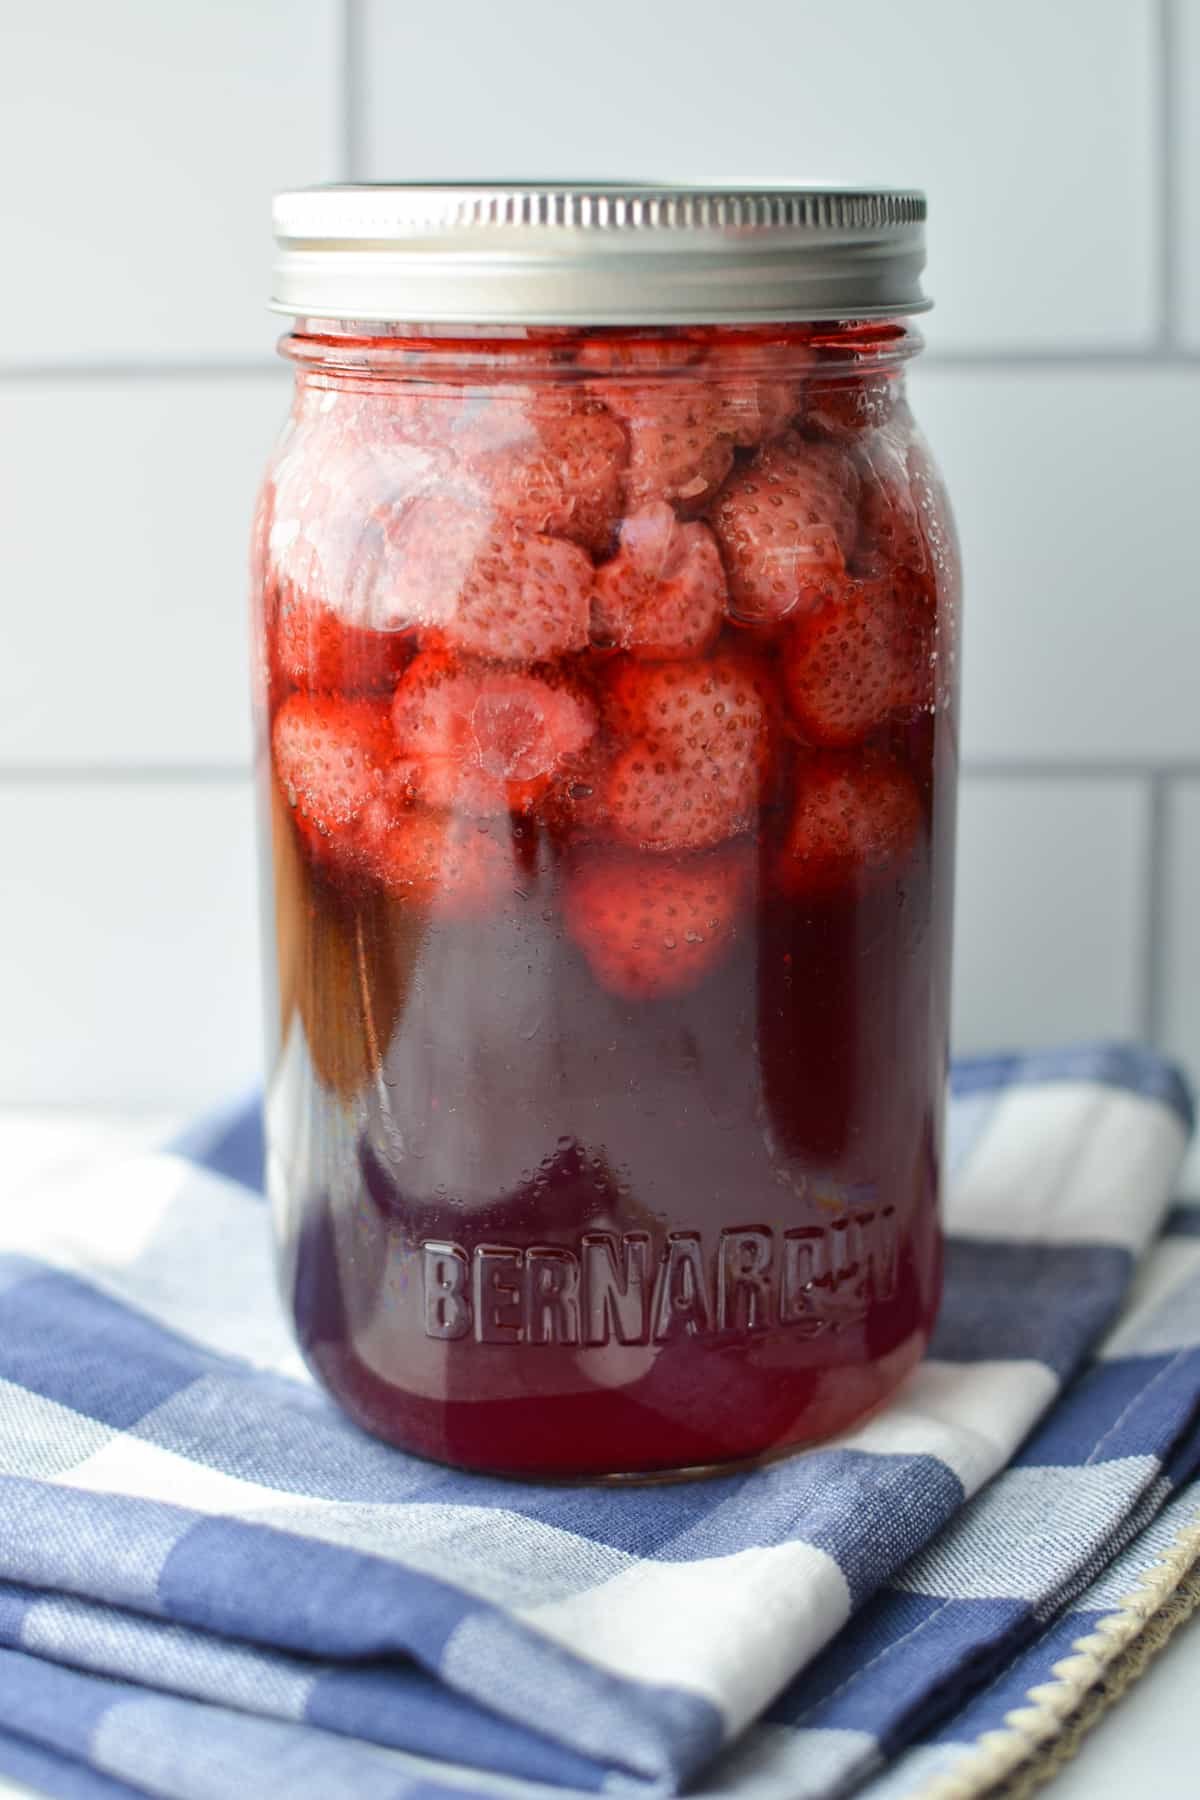 A jar of strawberries that has been home canned.